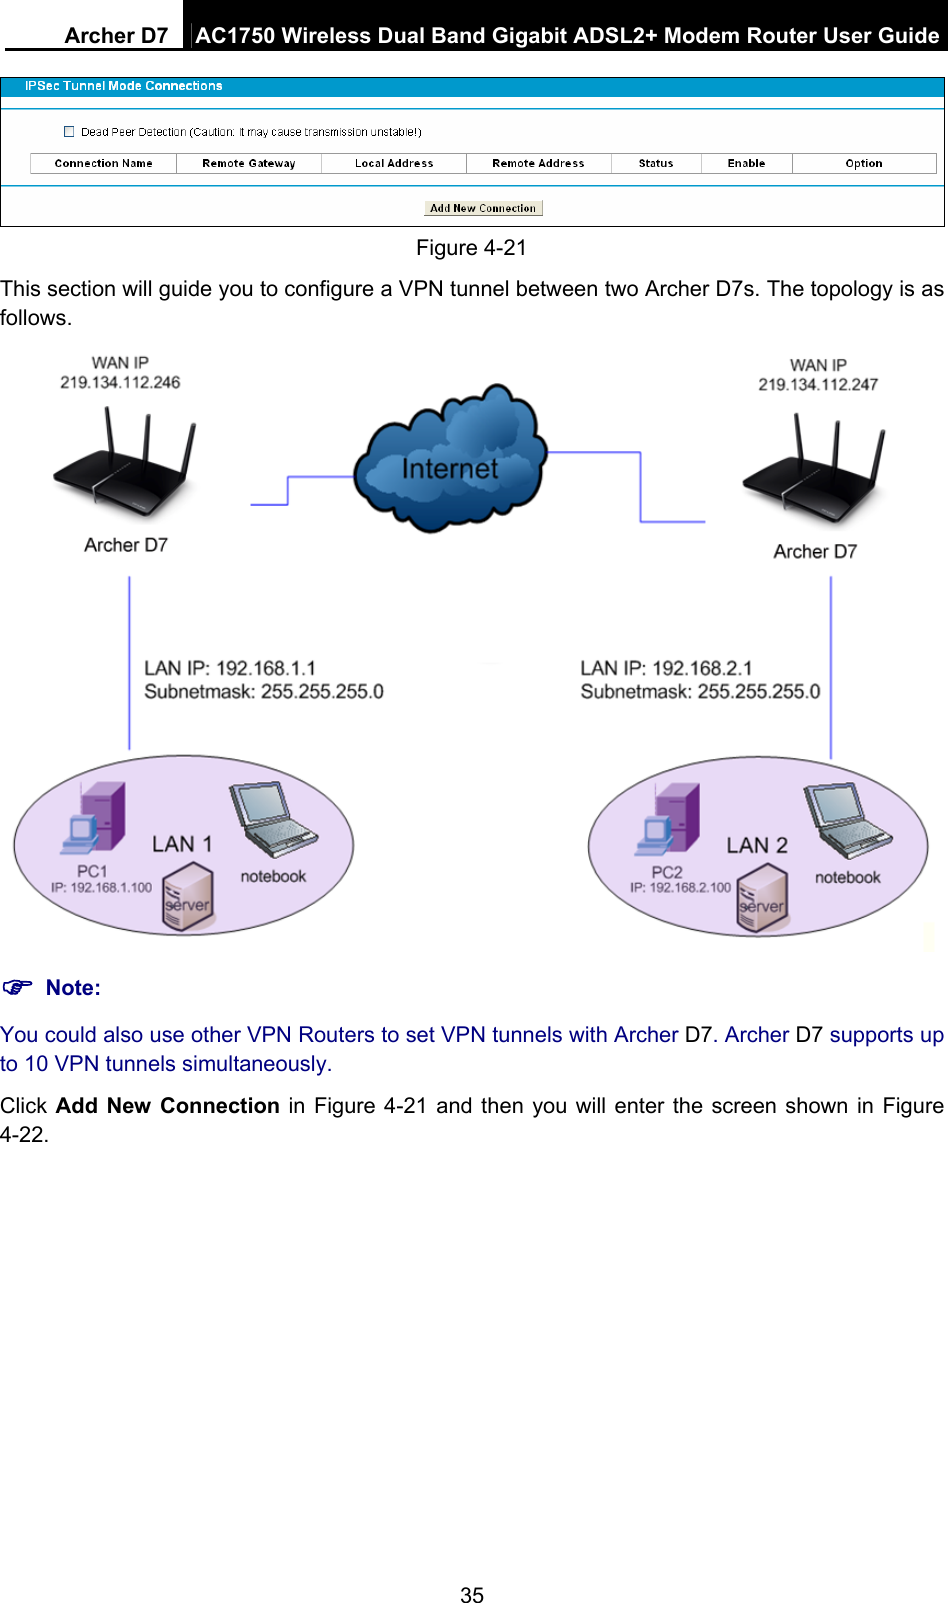 Archer D7  AC1750 Wireless Dual Band Gigabit ADSL2+ Modem Router User Guide 35  Figure 4-21 This section will guide you to configure a VPN tunnel between two Archer D7s. The topology is as follows.   Note: You could also use other VPN Routers to set VPN tunnels with Archer D7. Archer D7 supports up to 10 VPN tunnels simultaneously. Click Add New Connection in Figure 4-21 and then you will enter the screen shown in Figure 4-22. 